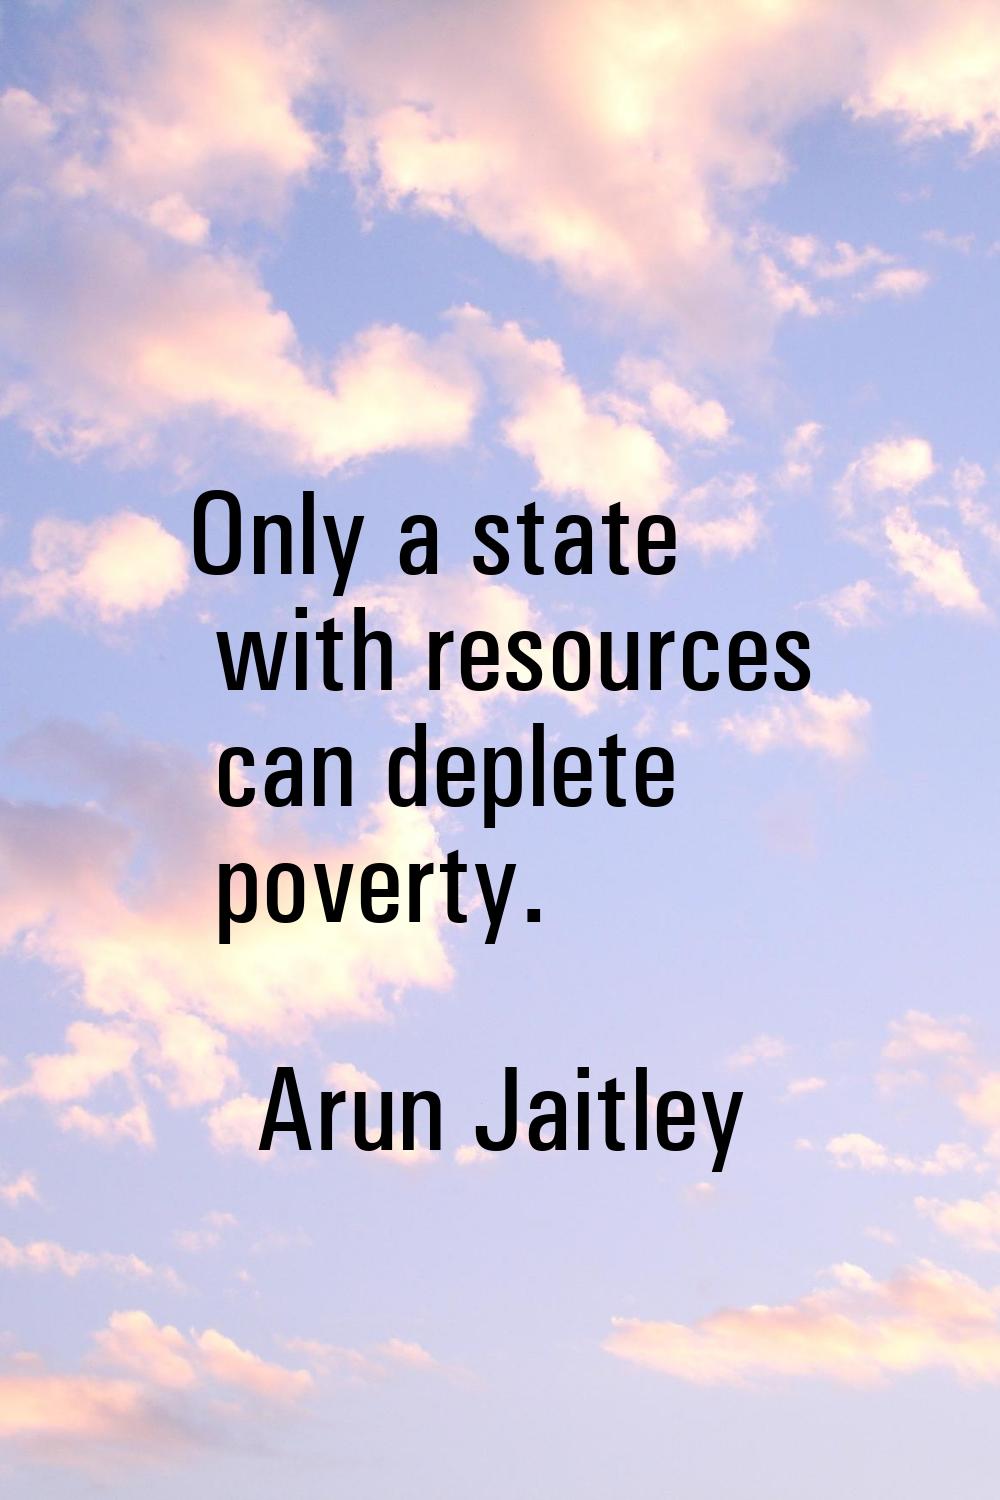 Only a state with resources can deplete poverty.